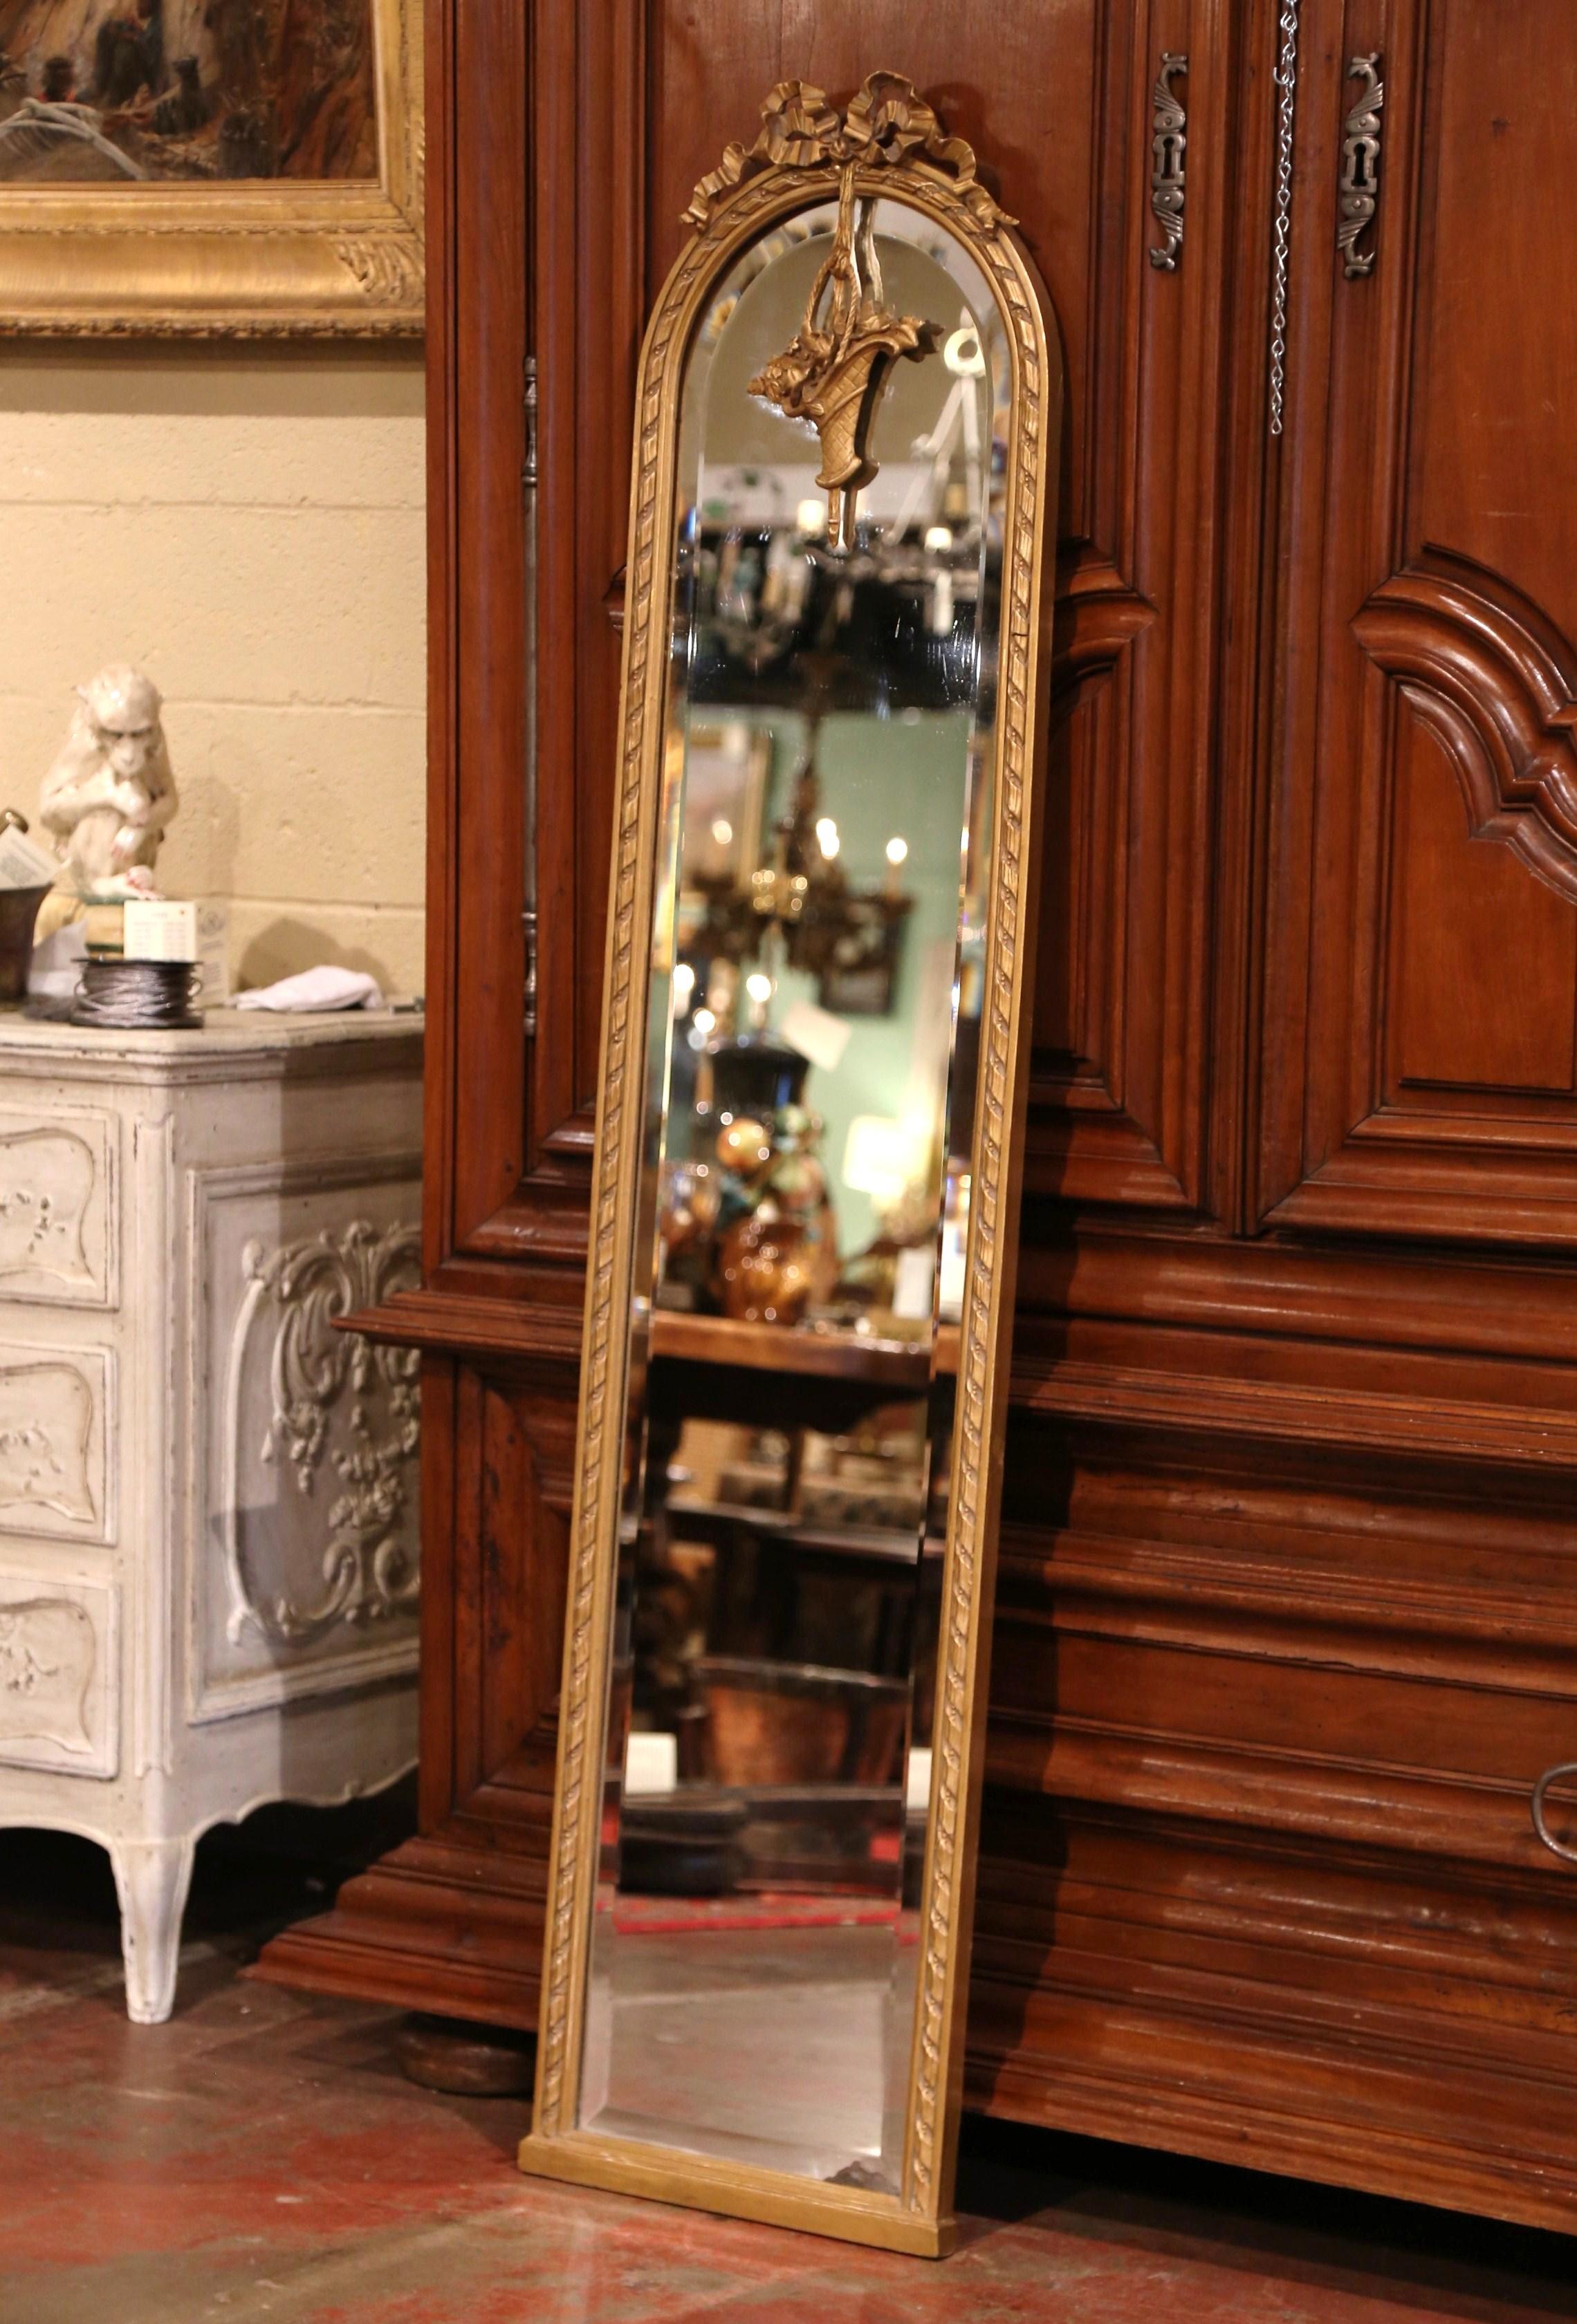 This narrow antique floor mirror was crafted in France, circa 1870. The tall mirror with arched top, features the traditional Louis XVI ribbon bow at the pediment, and is further embellished with a decorative carved basket of flowers hanging down